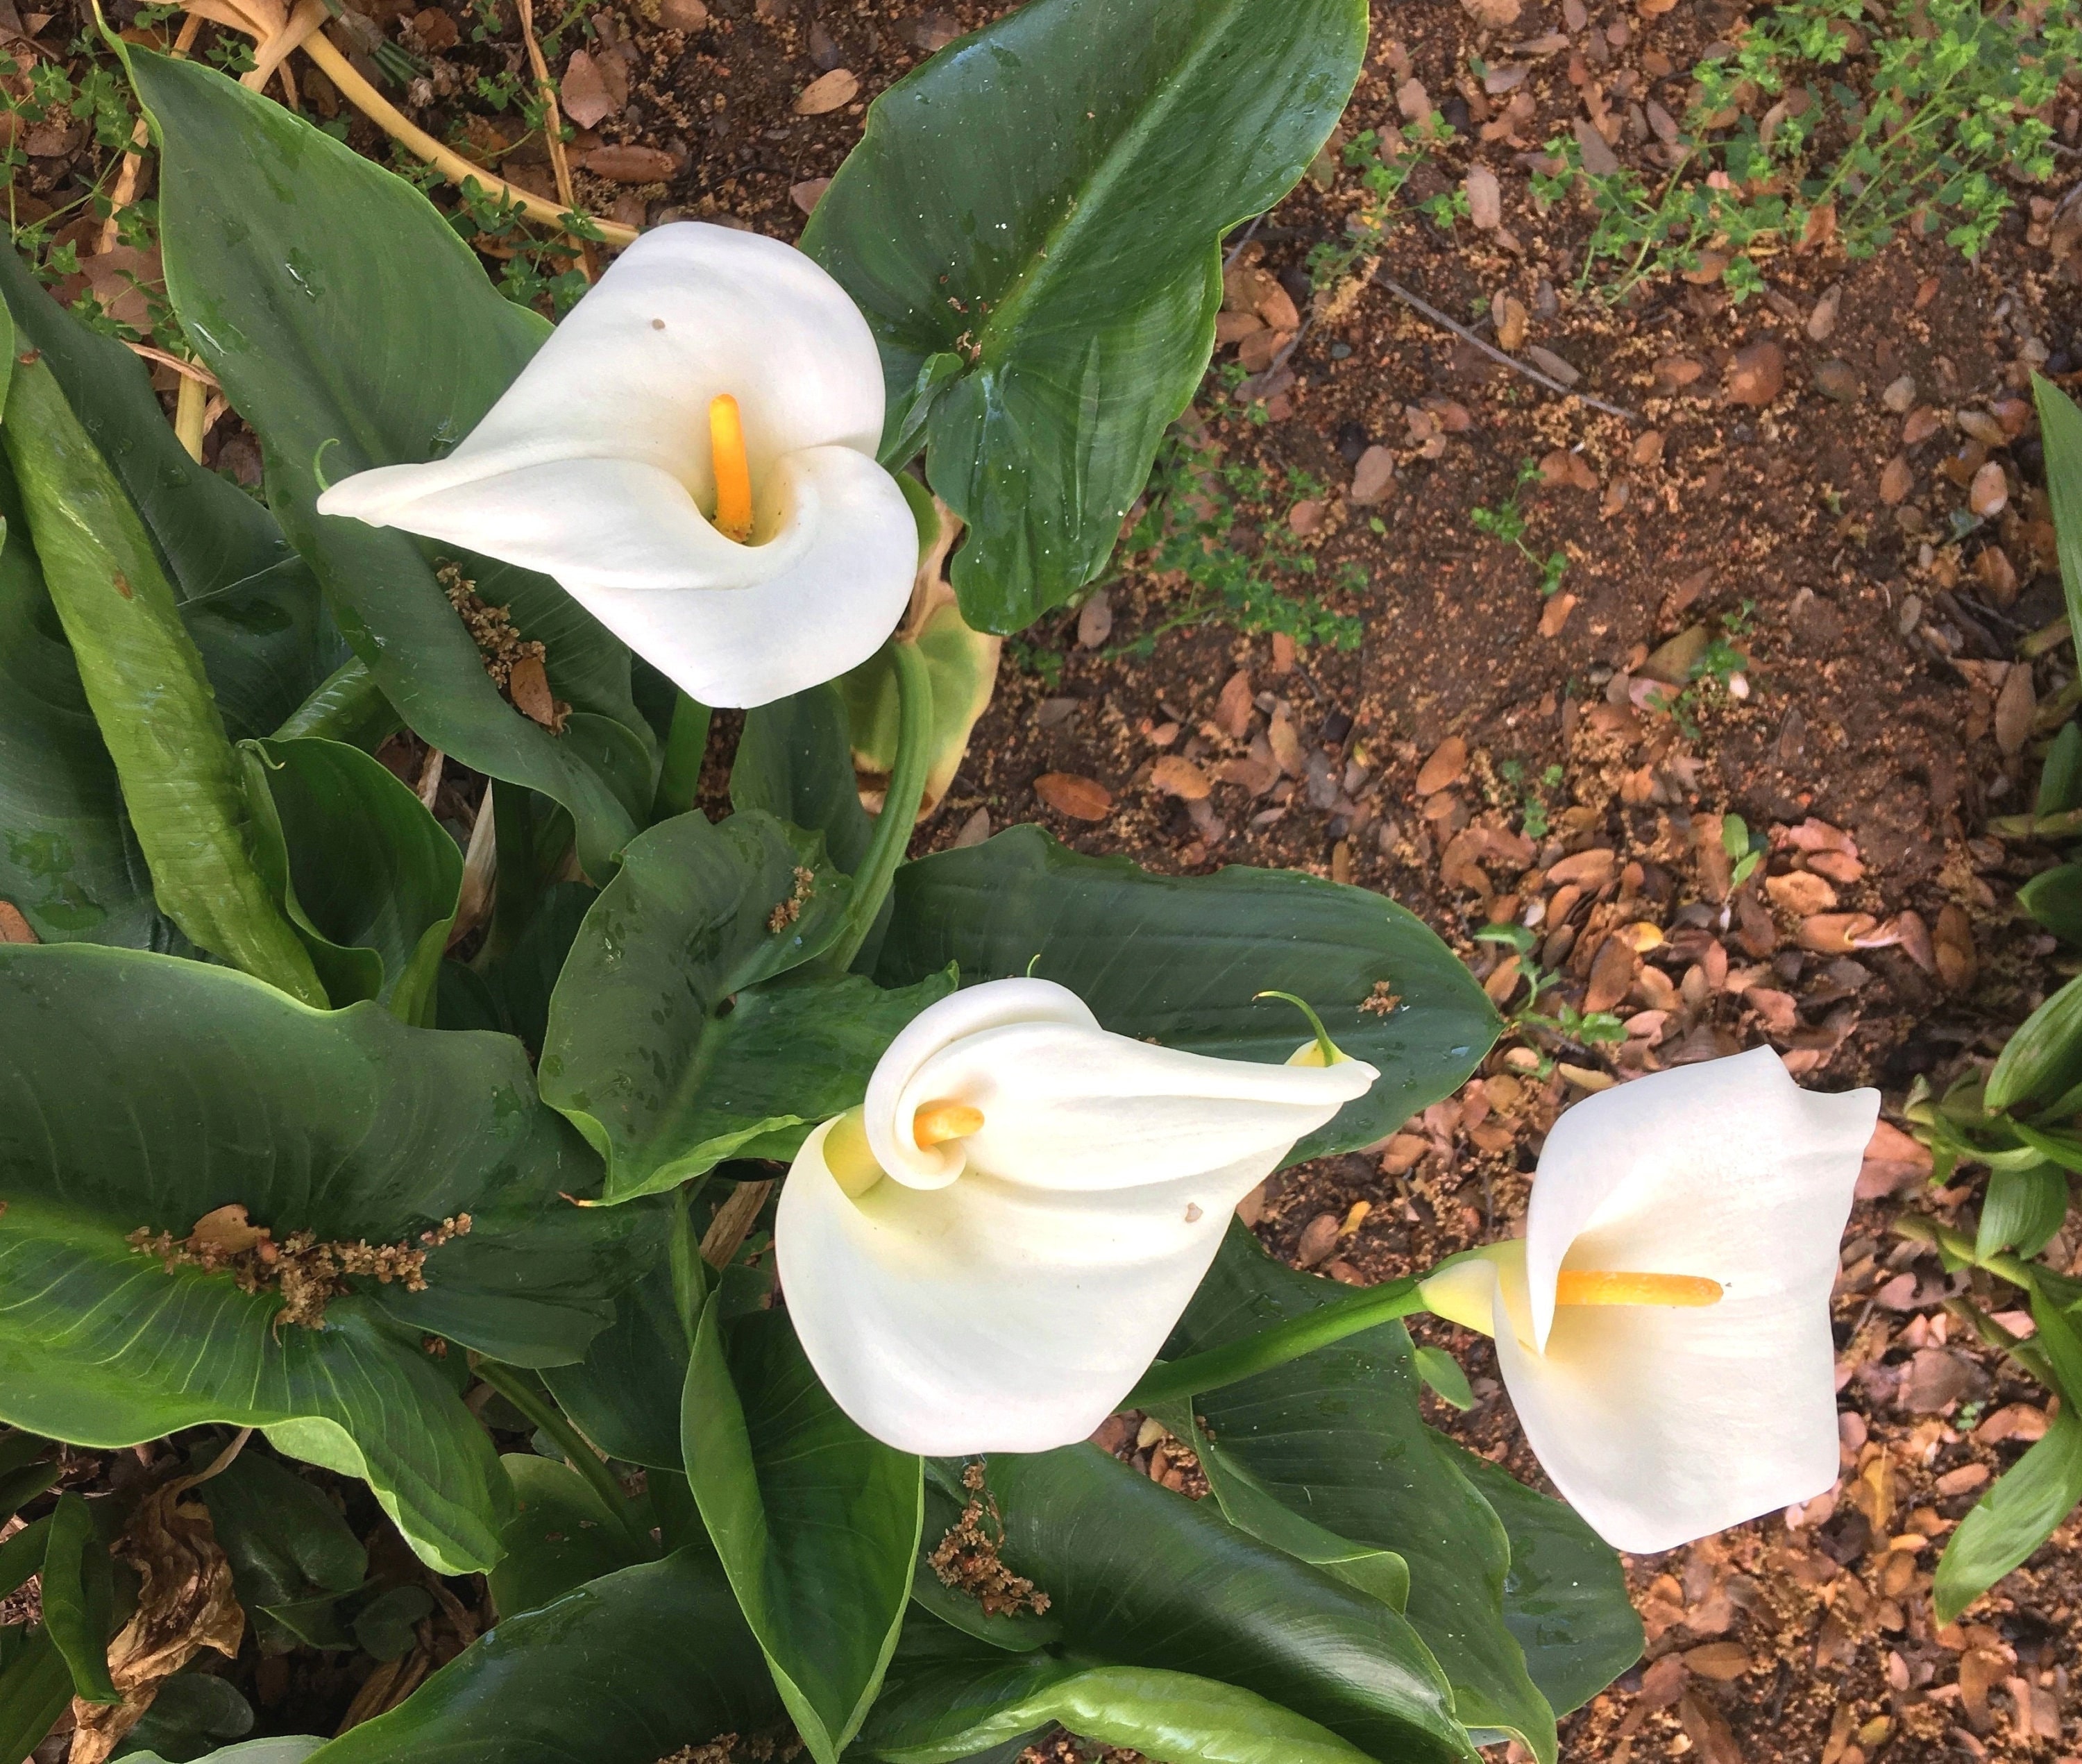 Large Calla Lily, White Arum Lily, Zantedeschia aethiopica, long-lasting flowers for home or garden, easy to grow, tropical POTTED PLANT